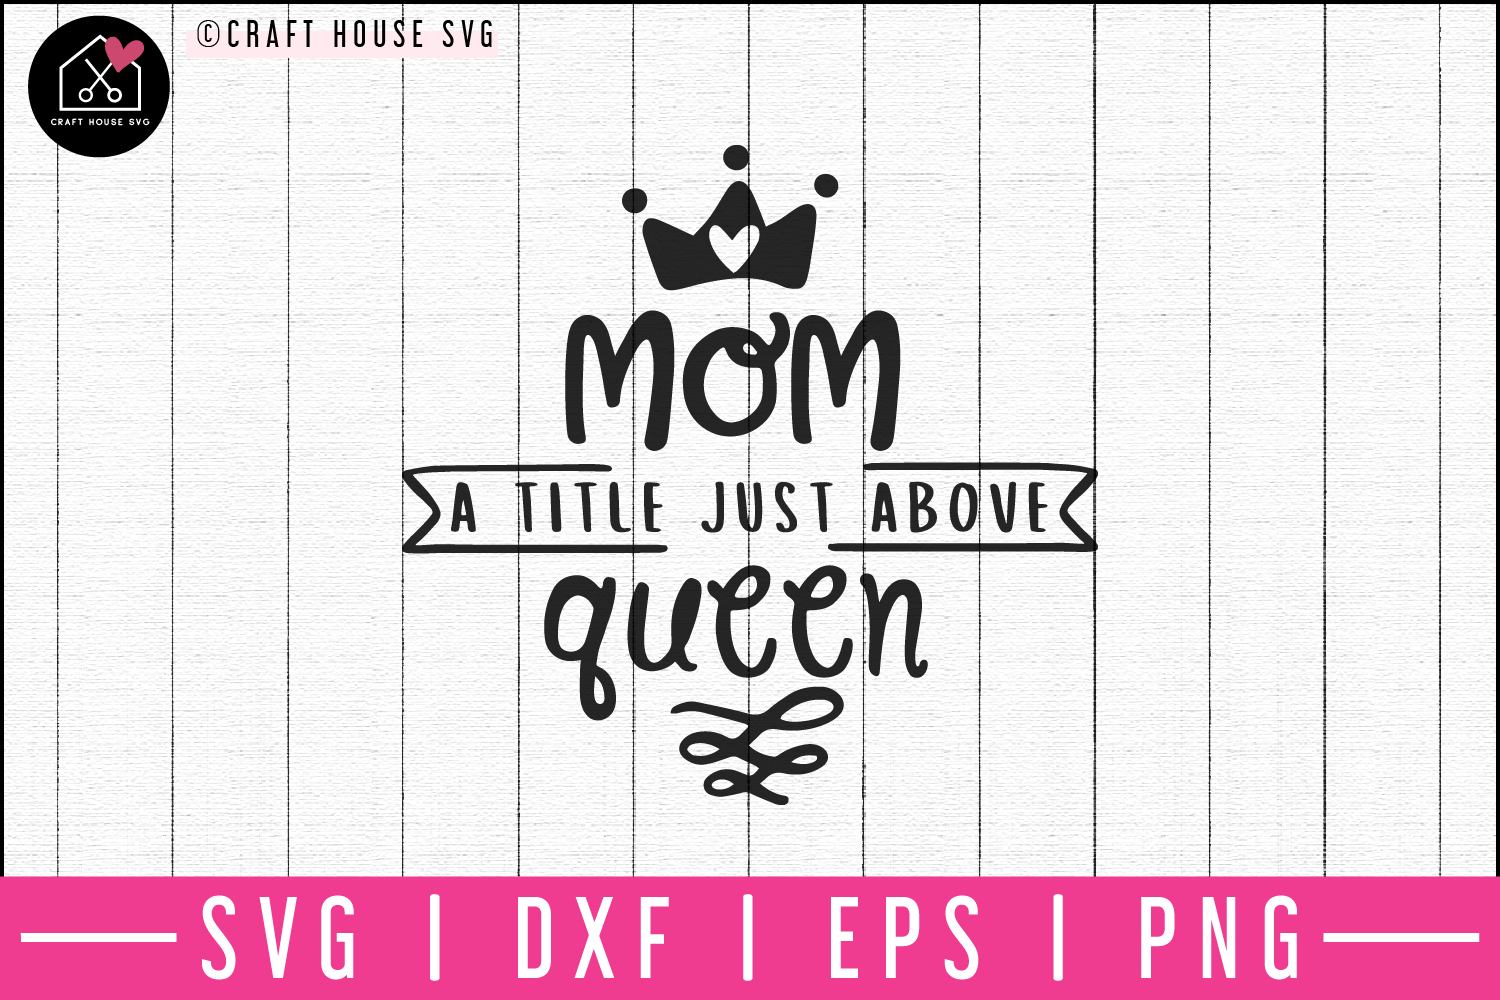 Mom a title just above queen SVG | M52F Craft House SVG - SVG files for Cricut and Silhouette